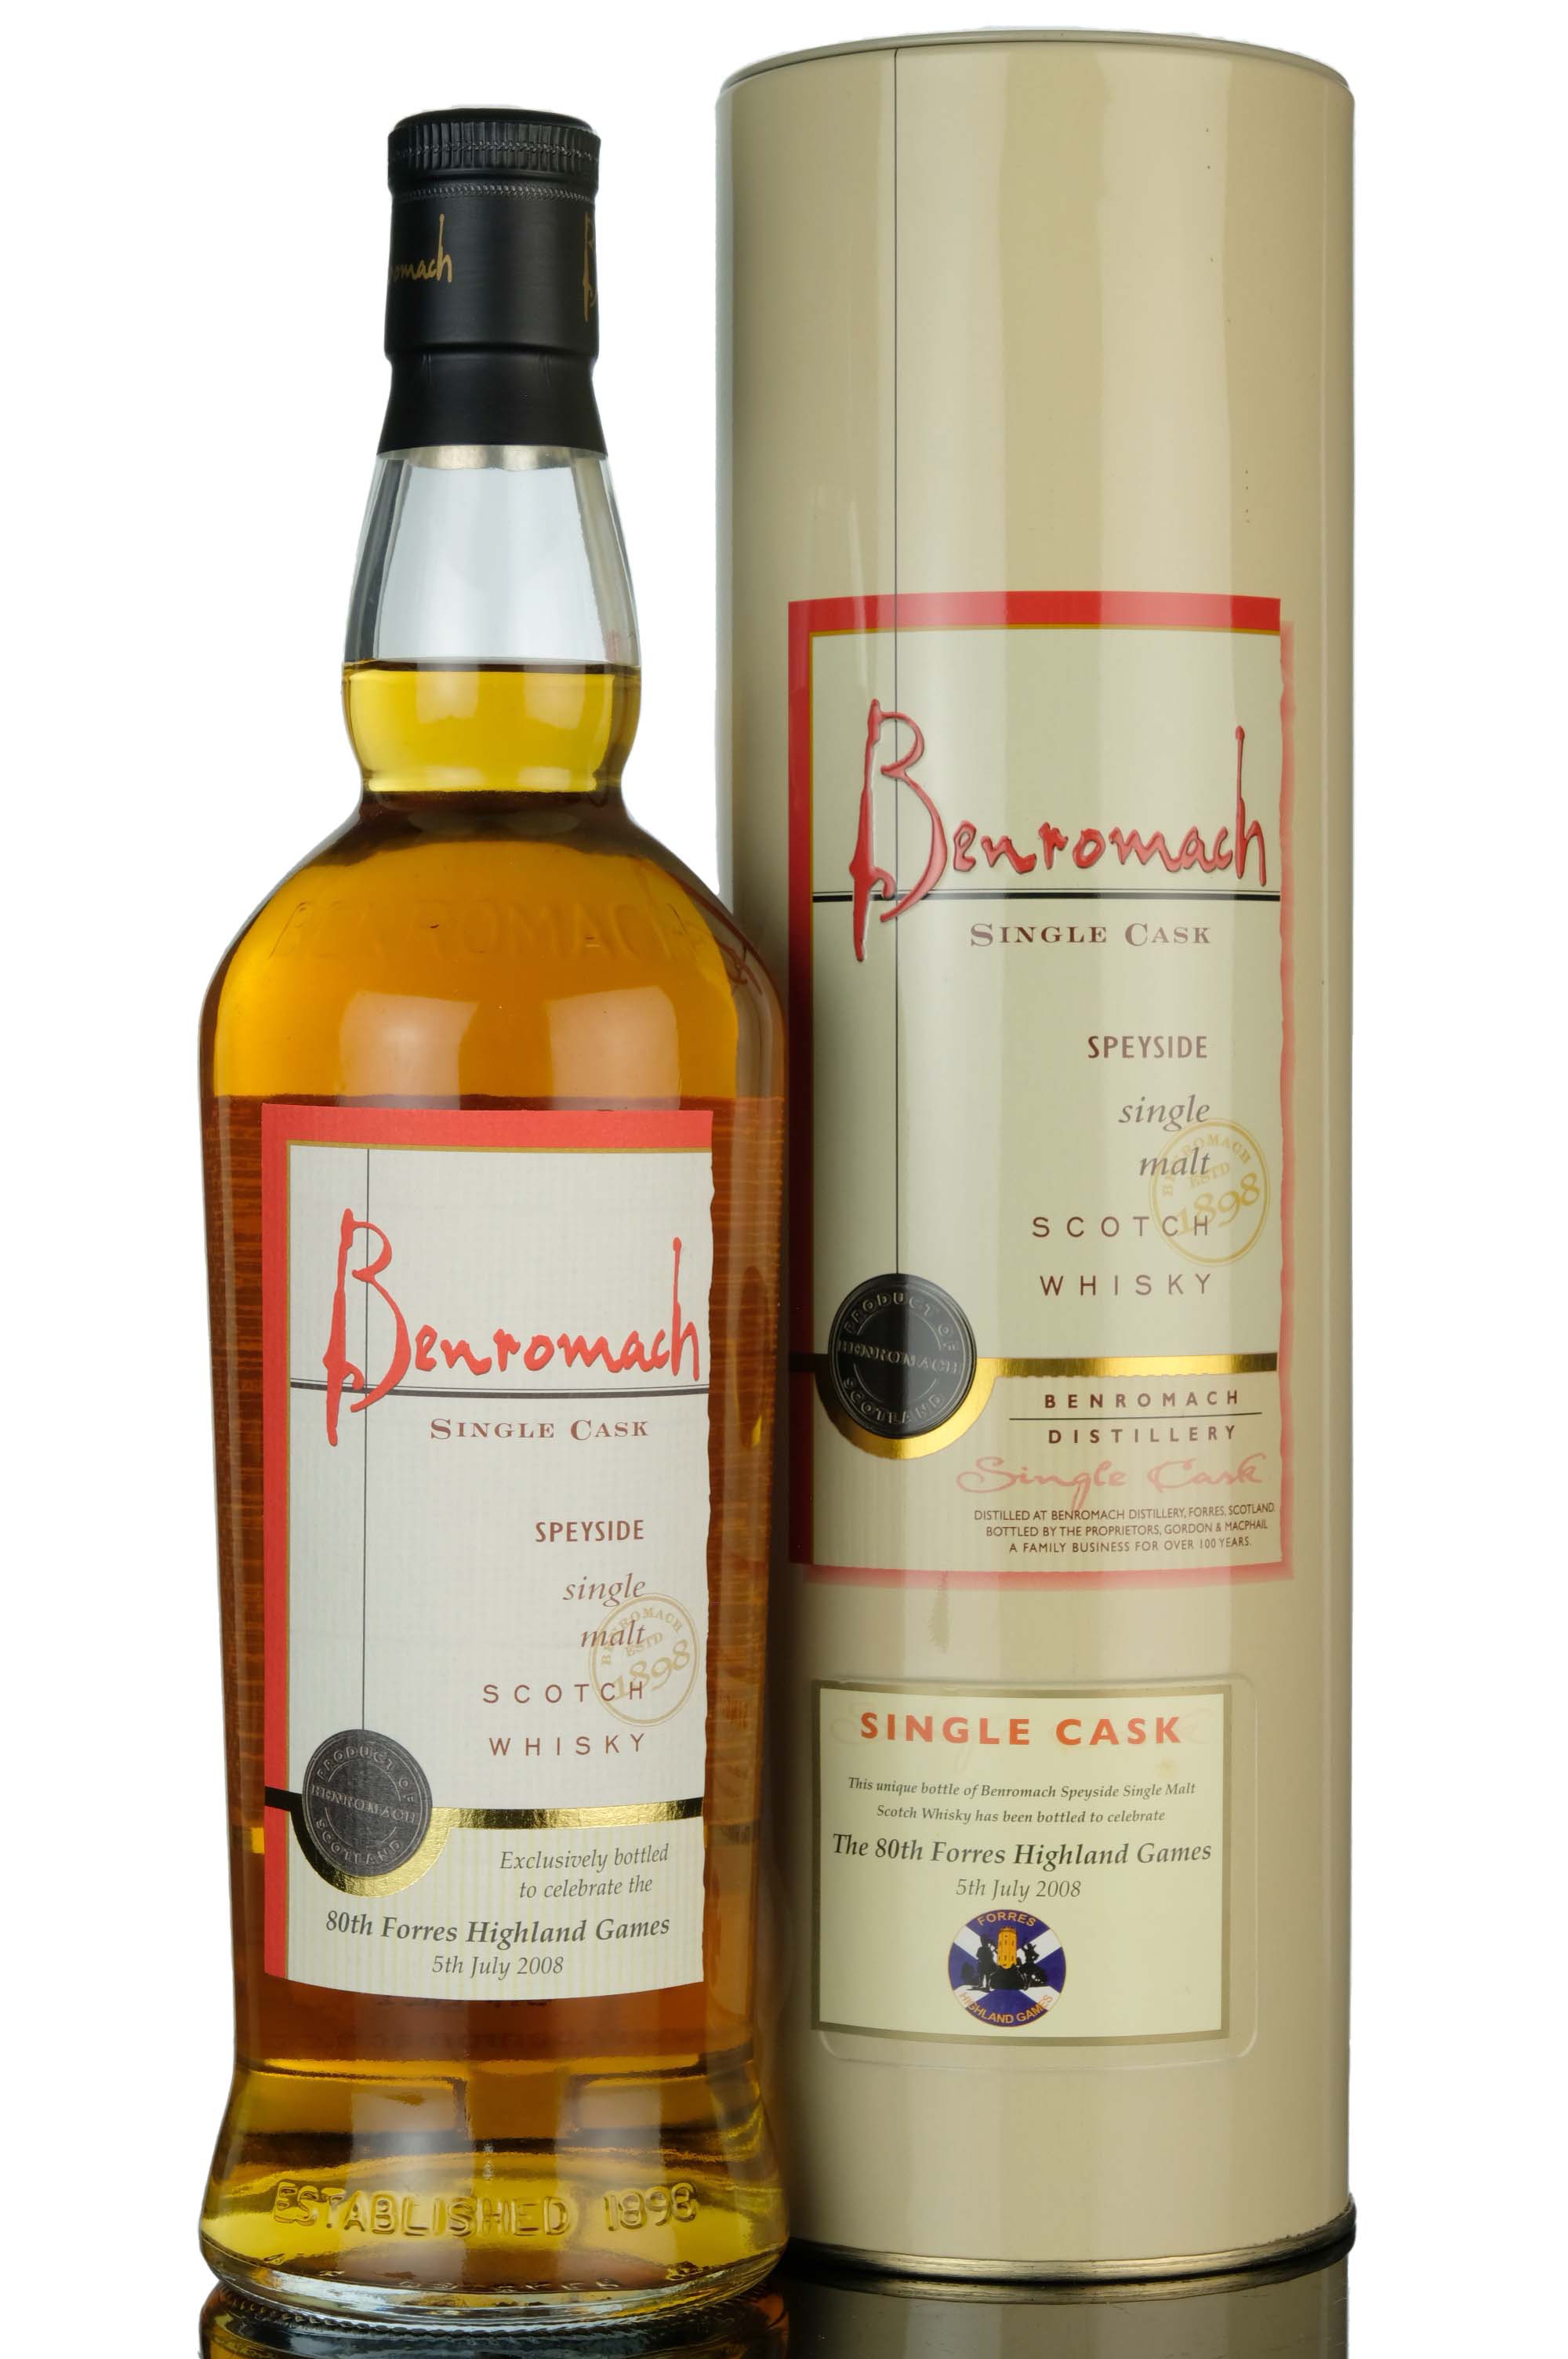 Benromach 2000 - The 80th Forres Highland Games 2008 - Single Cask 54